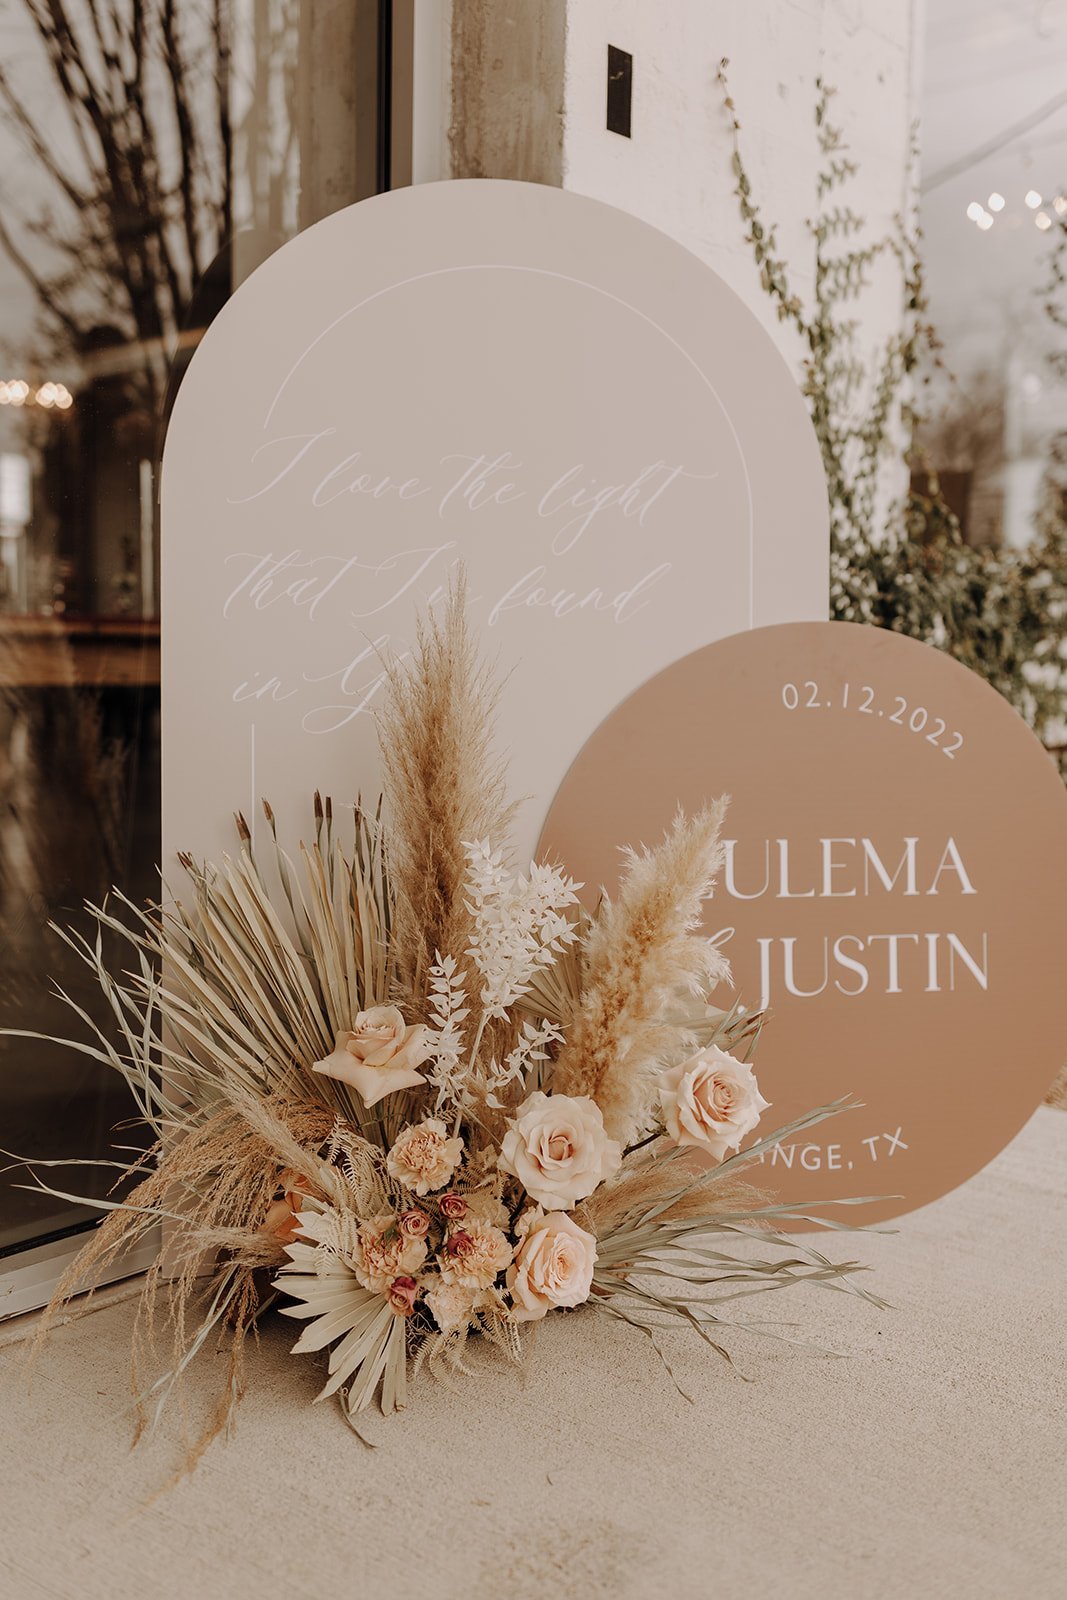 Neutral colored wedding reception sign and floral bouquet